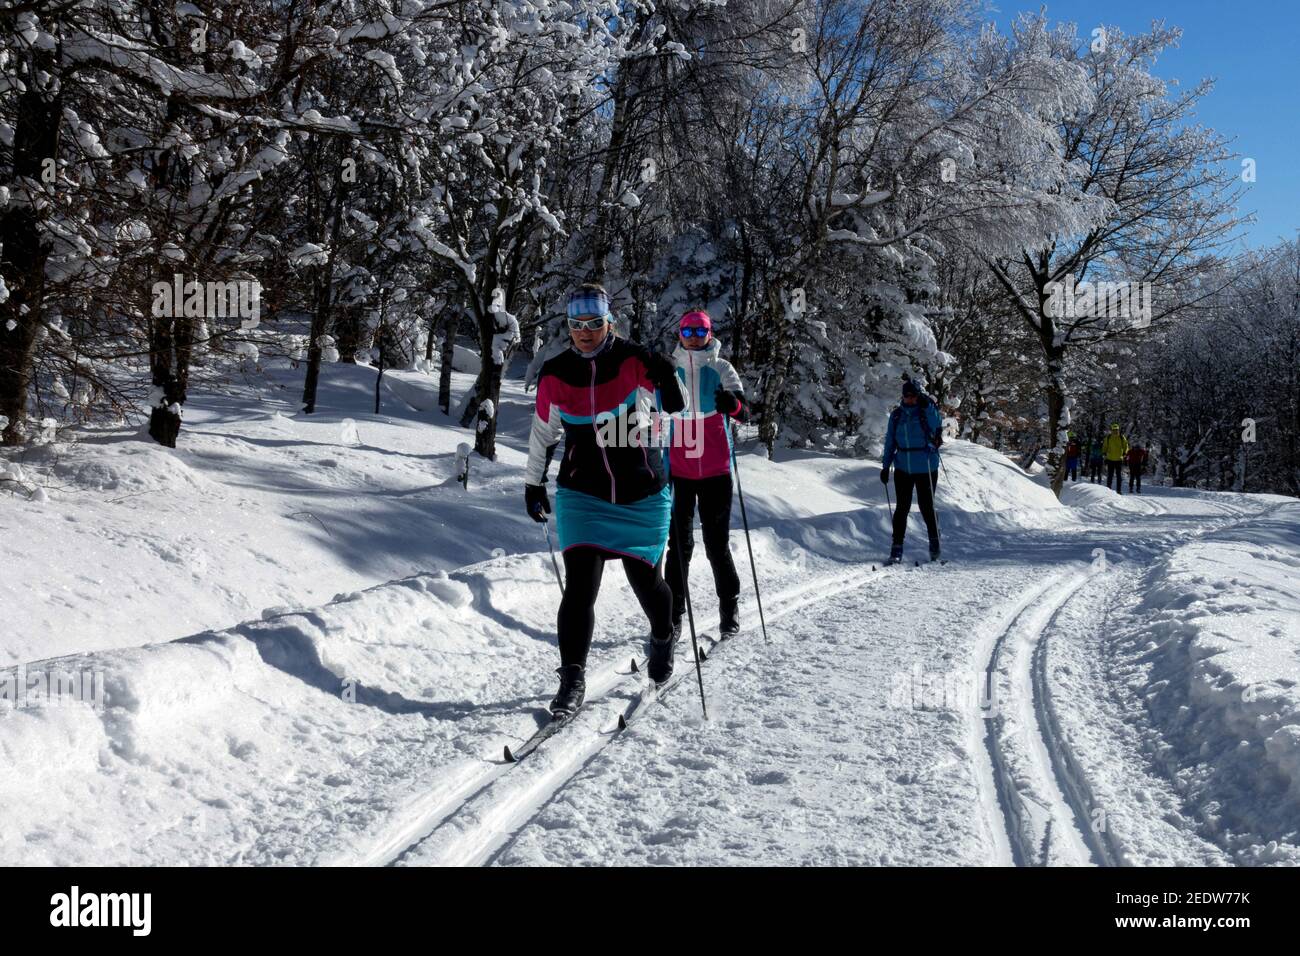 Trail in snowy forest Women skiers outdoors fitness Stock Photo